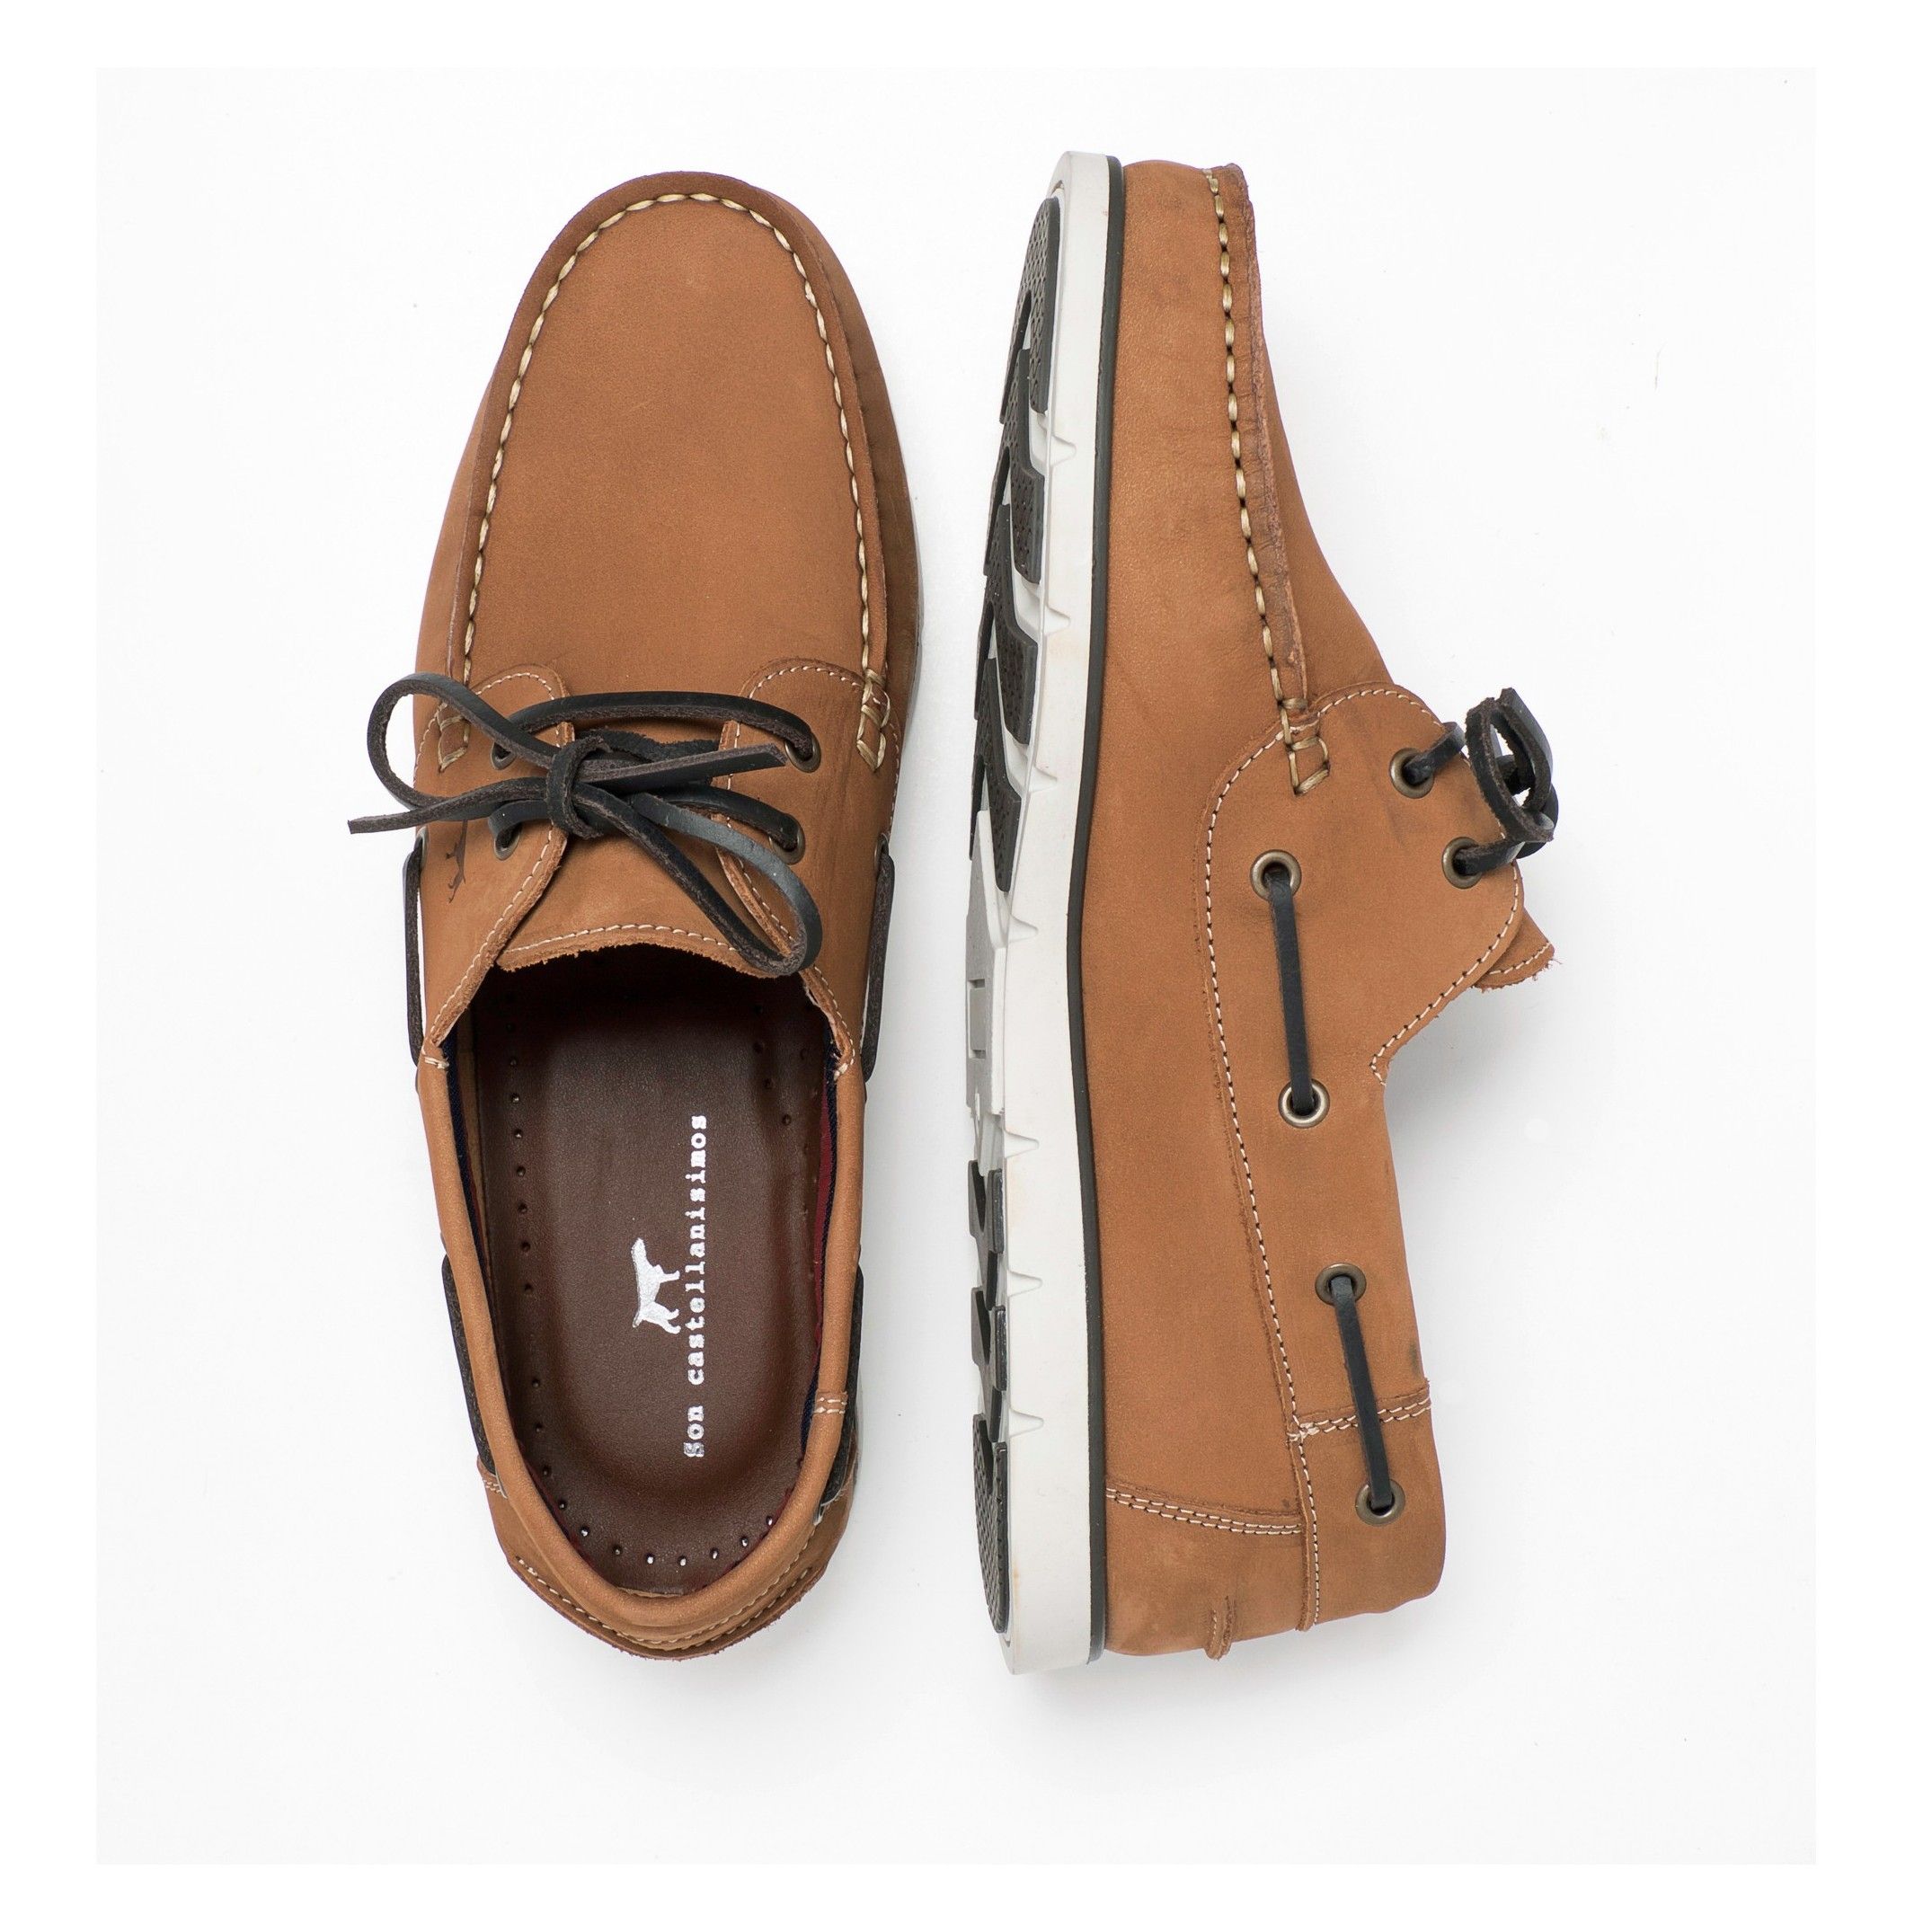 Nubuck leather boat shoes, by Son Castellanisimos. Upper made of cowhide leather. Leather laces closure. Inner and insole made of cowhide leather. Sole material: synthetic and non slip.  Heel height: 1'5 cm. Designed and made in Spain.